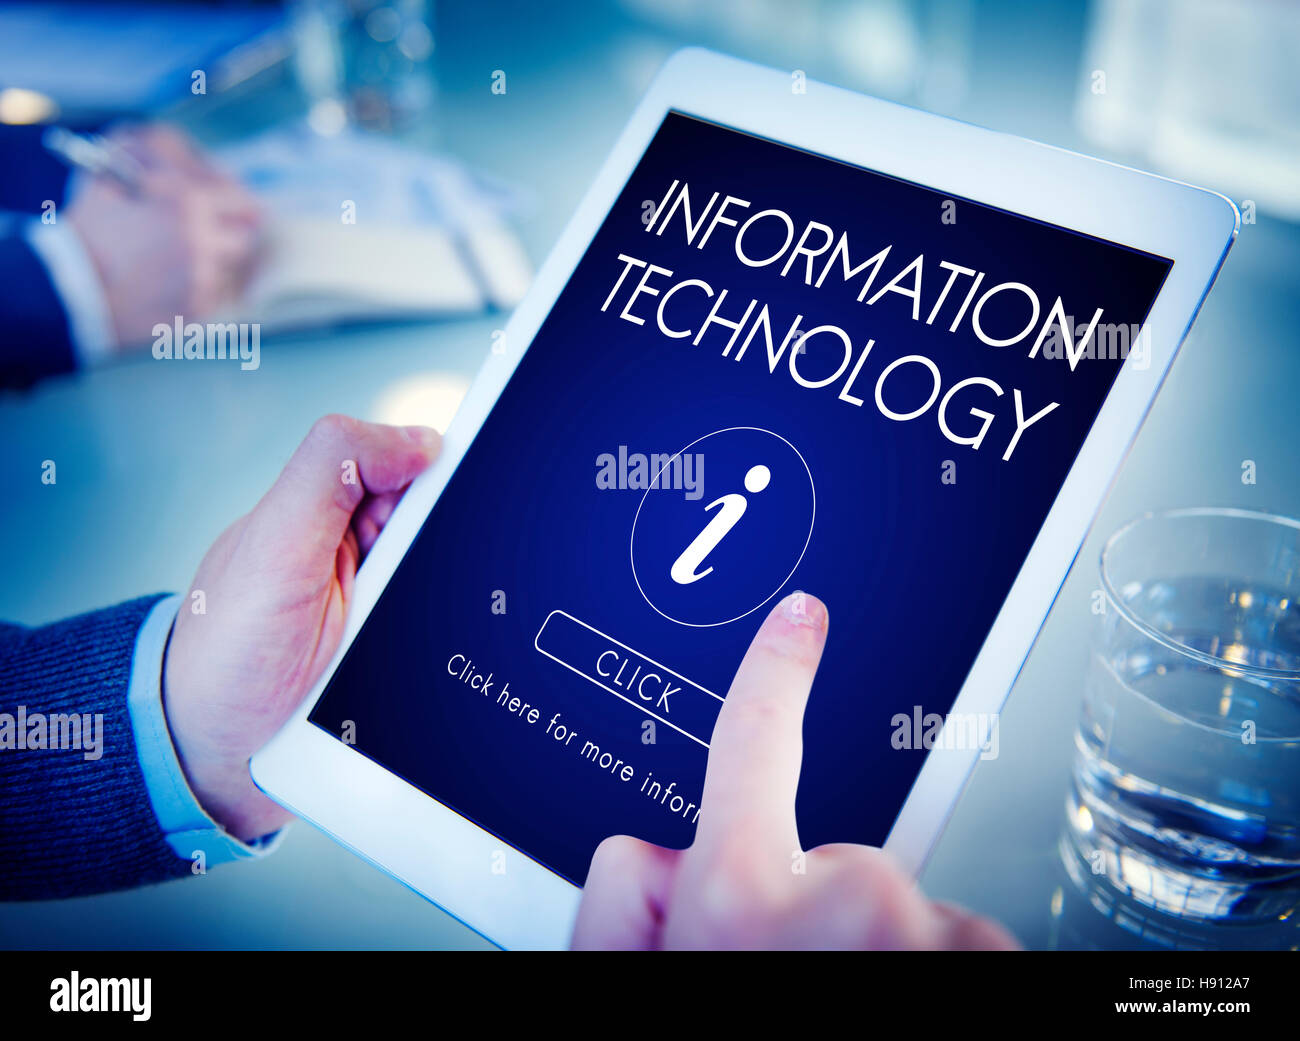 Big Data Information Technology Networking Concept Stock Photo